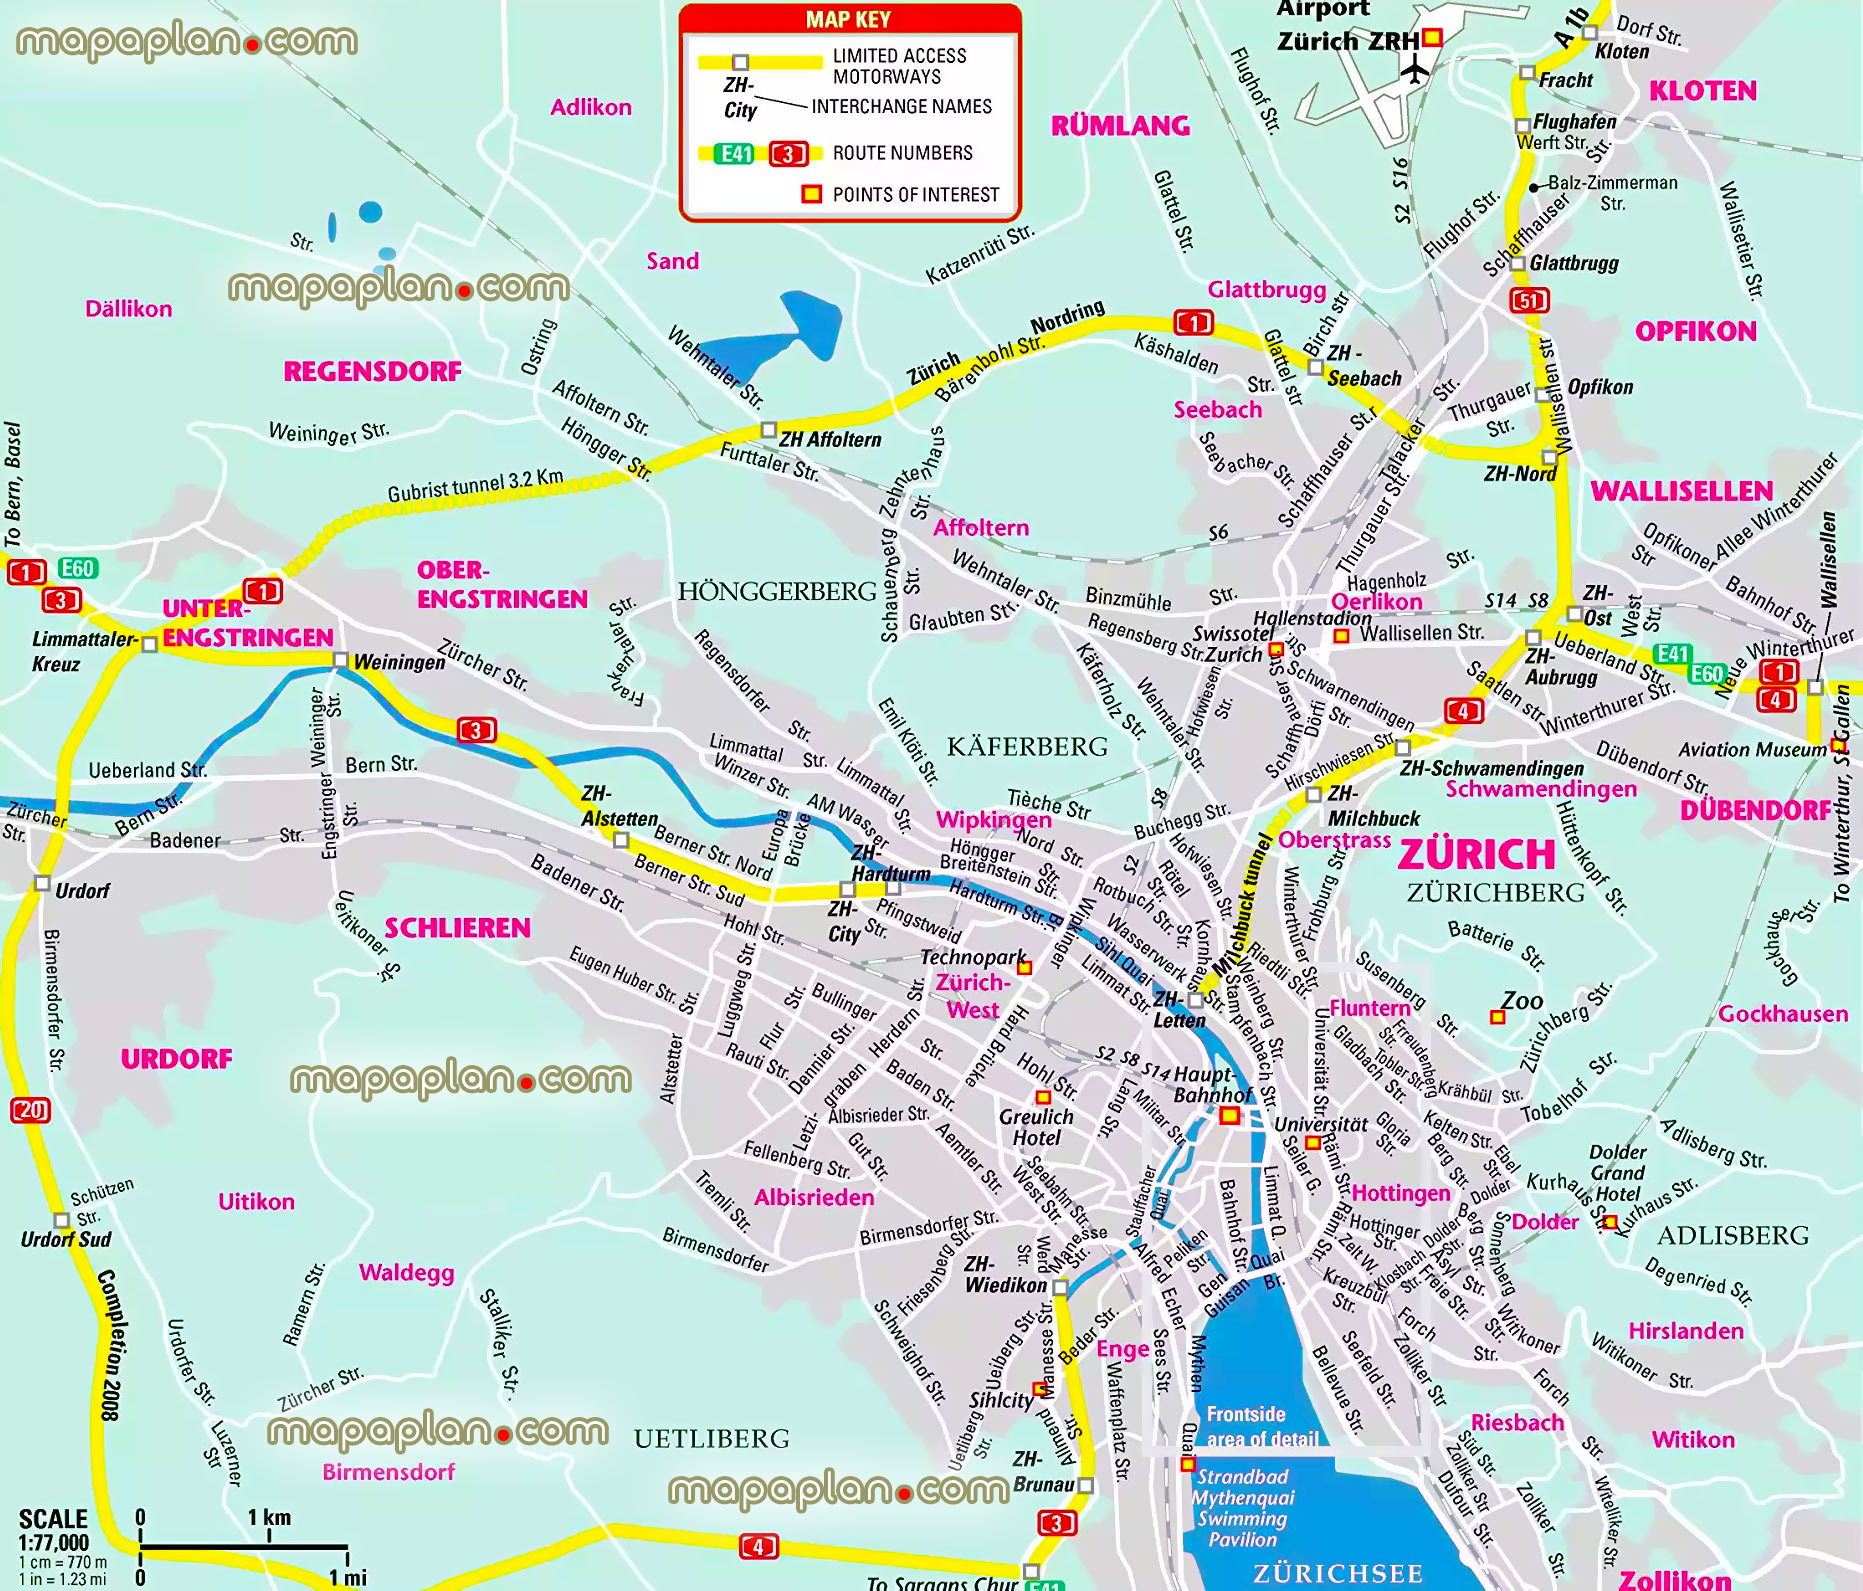 greater zurich metropolitan area free download printable detailed guide surrounding area attractions road airport cities main districts neighbourhoodss Zurich Top tourist attractions map